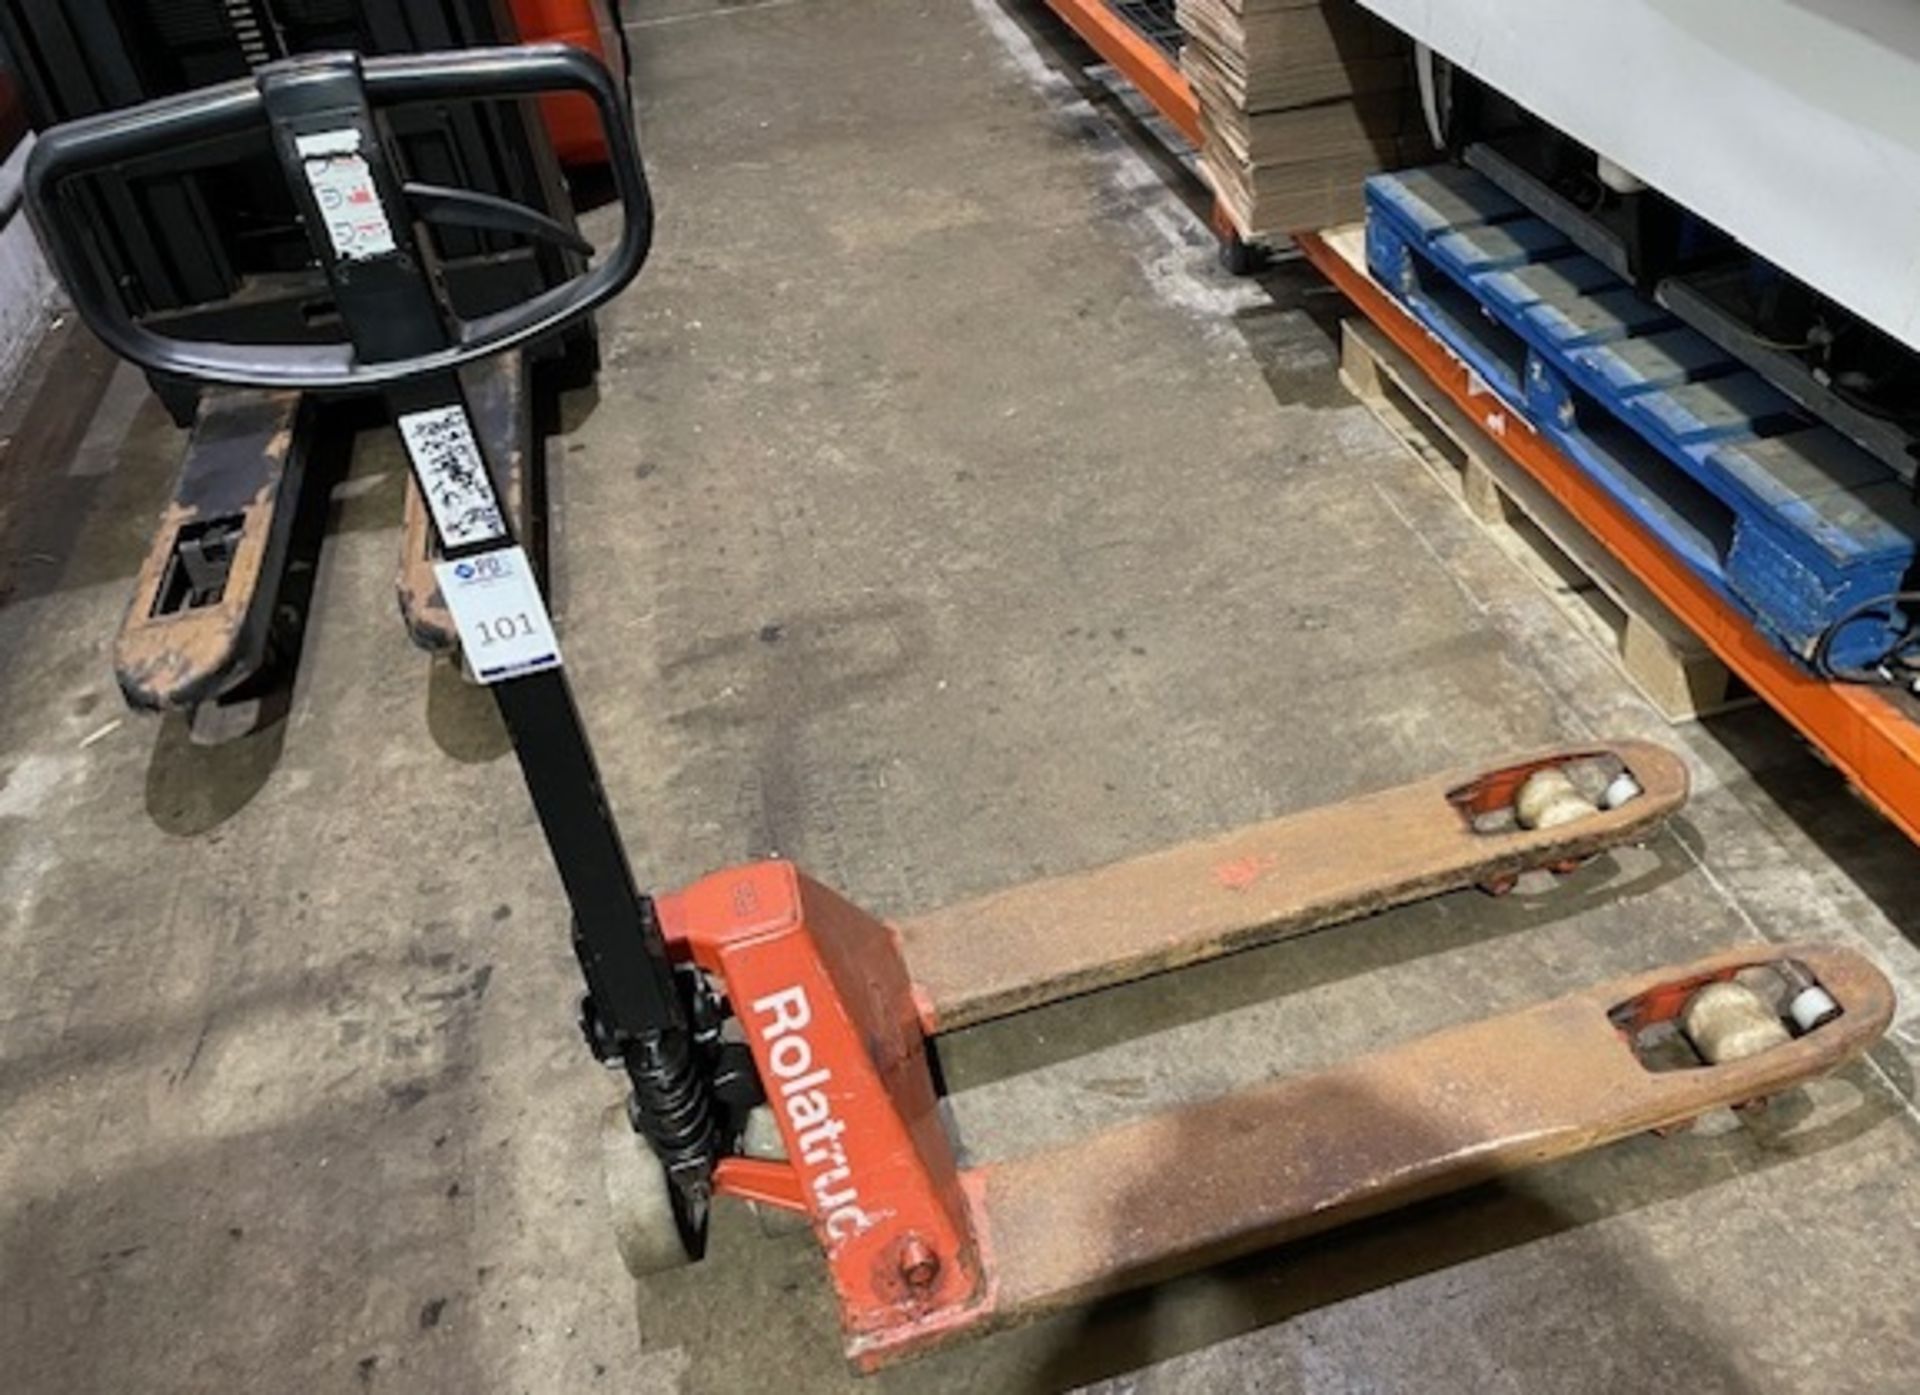 BT Rolatruc Hydraulic Pallet Truck (Location: NW London. Please Refer to General Notes)